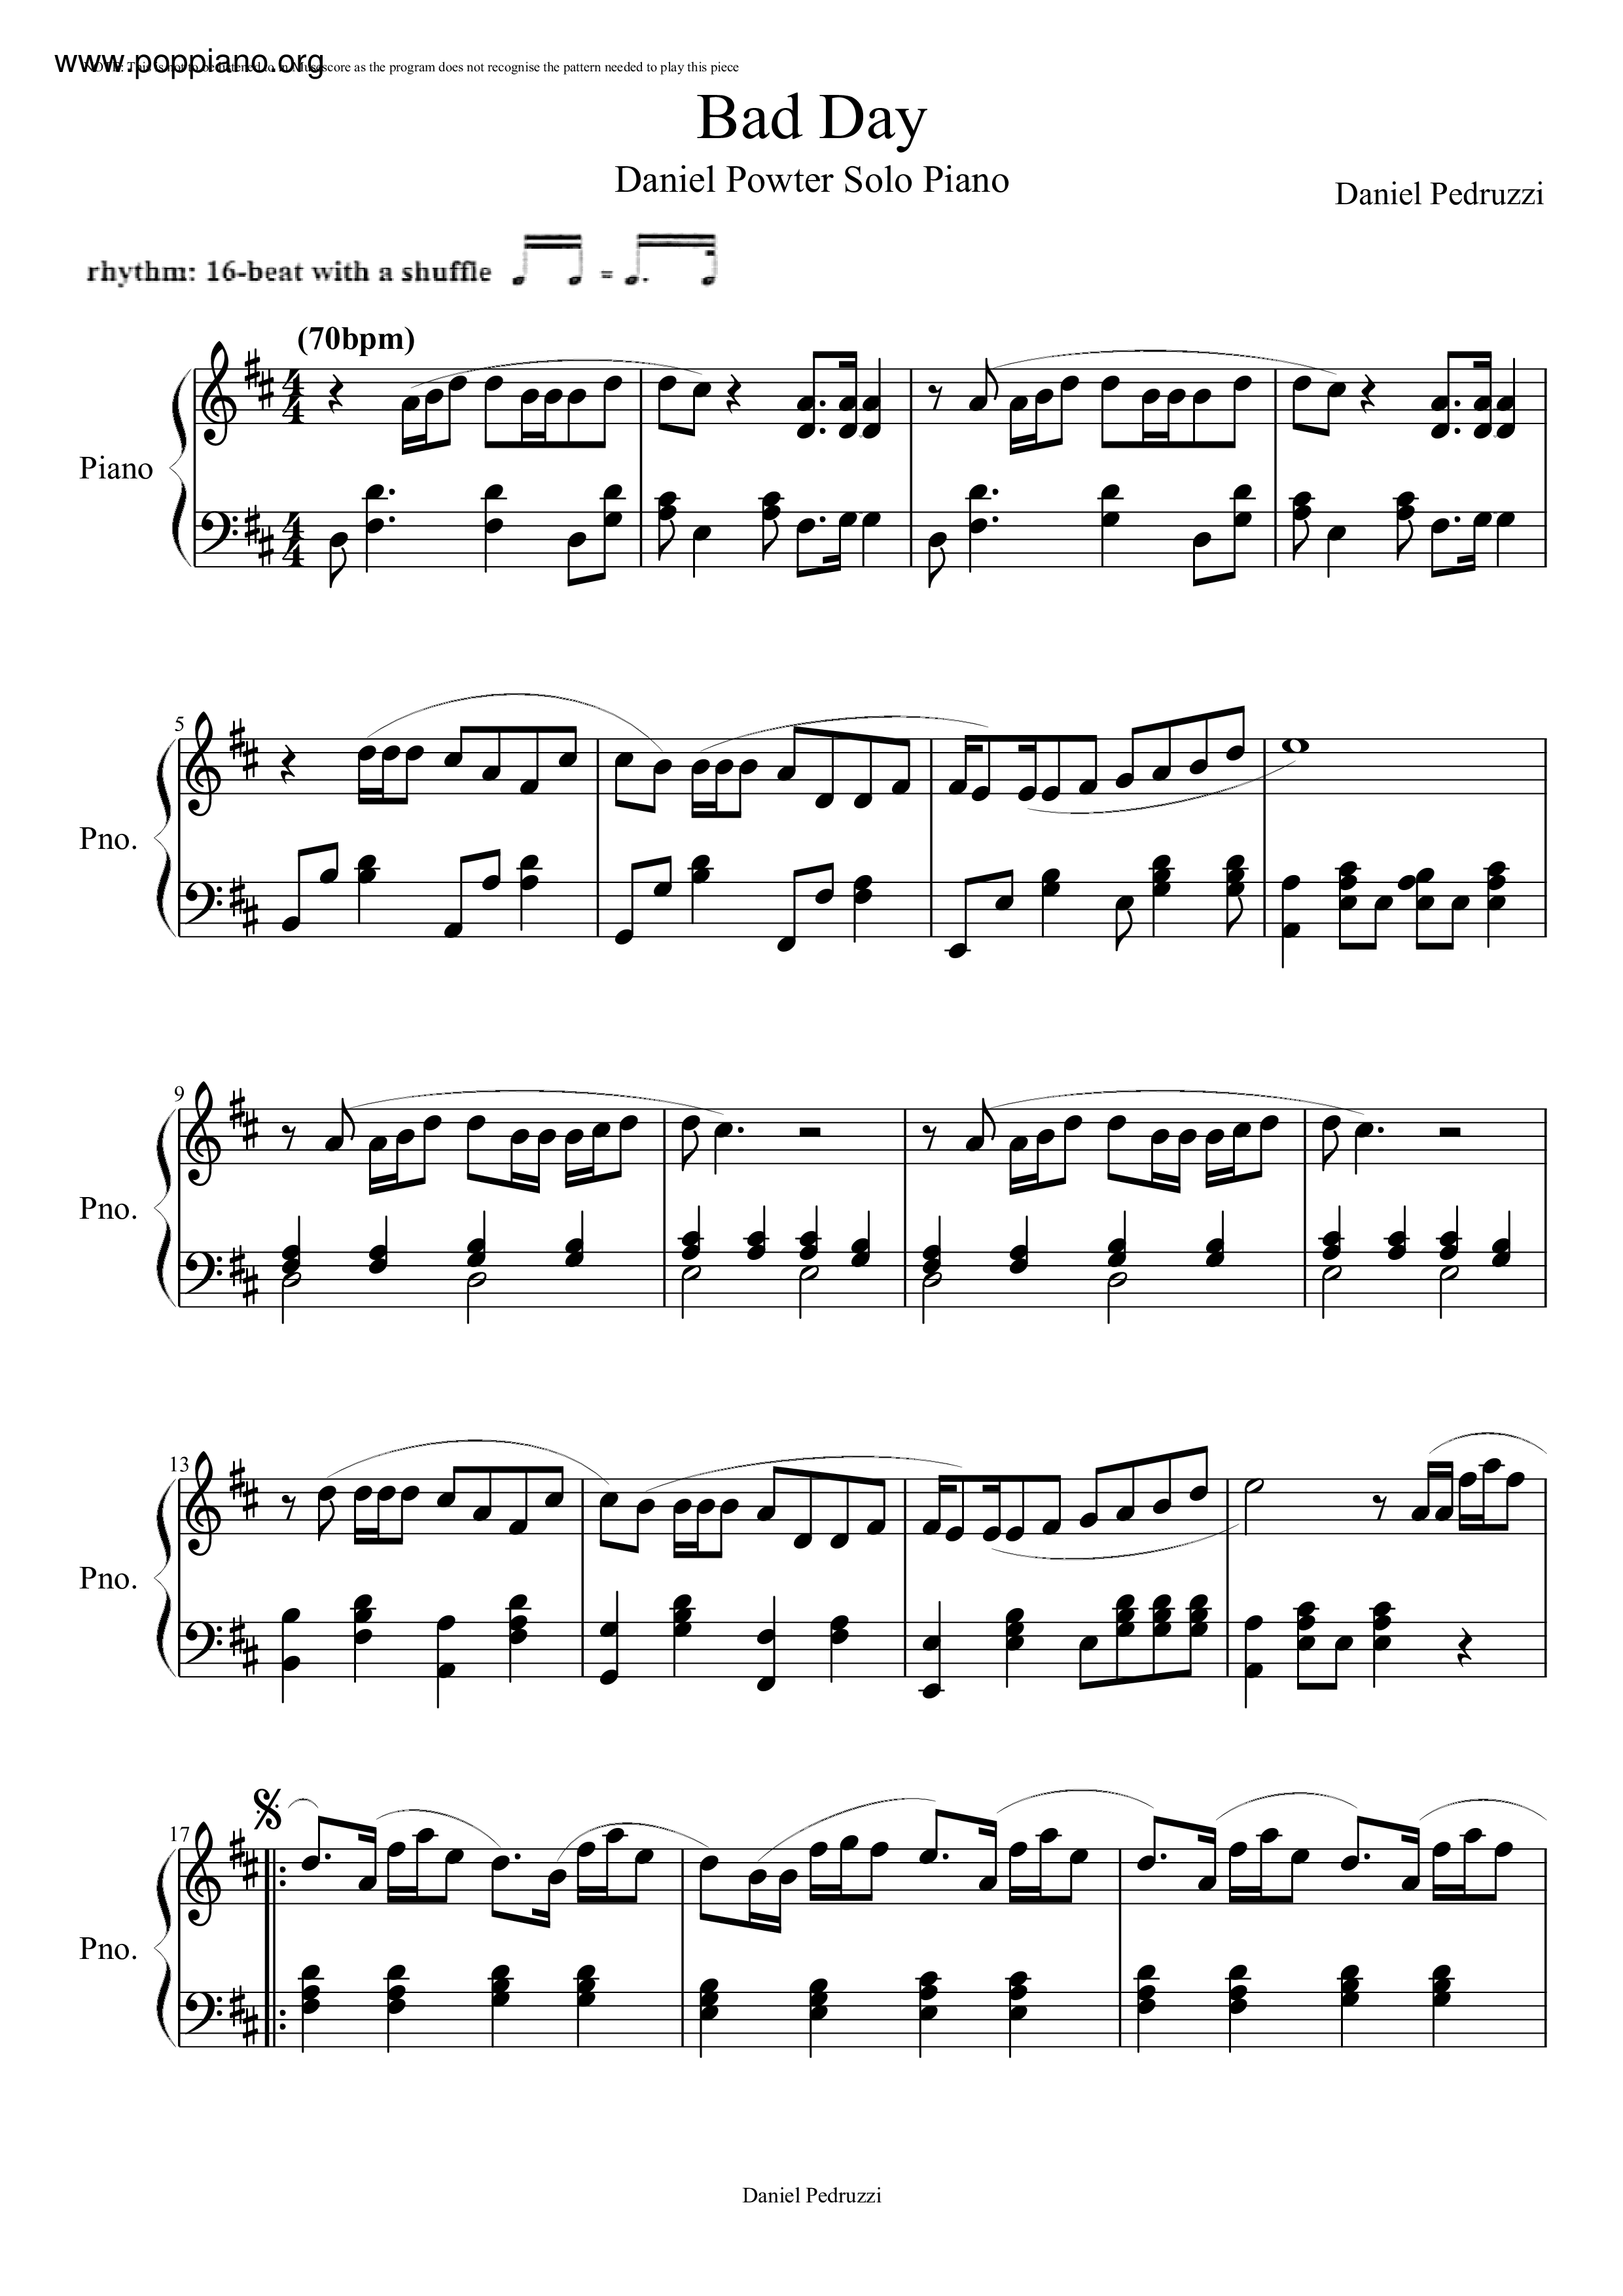 100 Bad Days - Sheet music for Piano